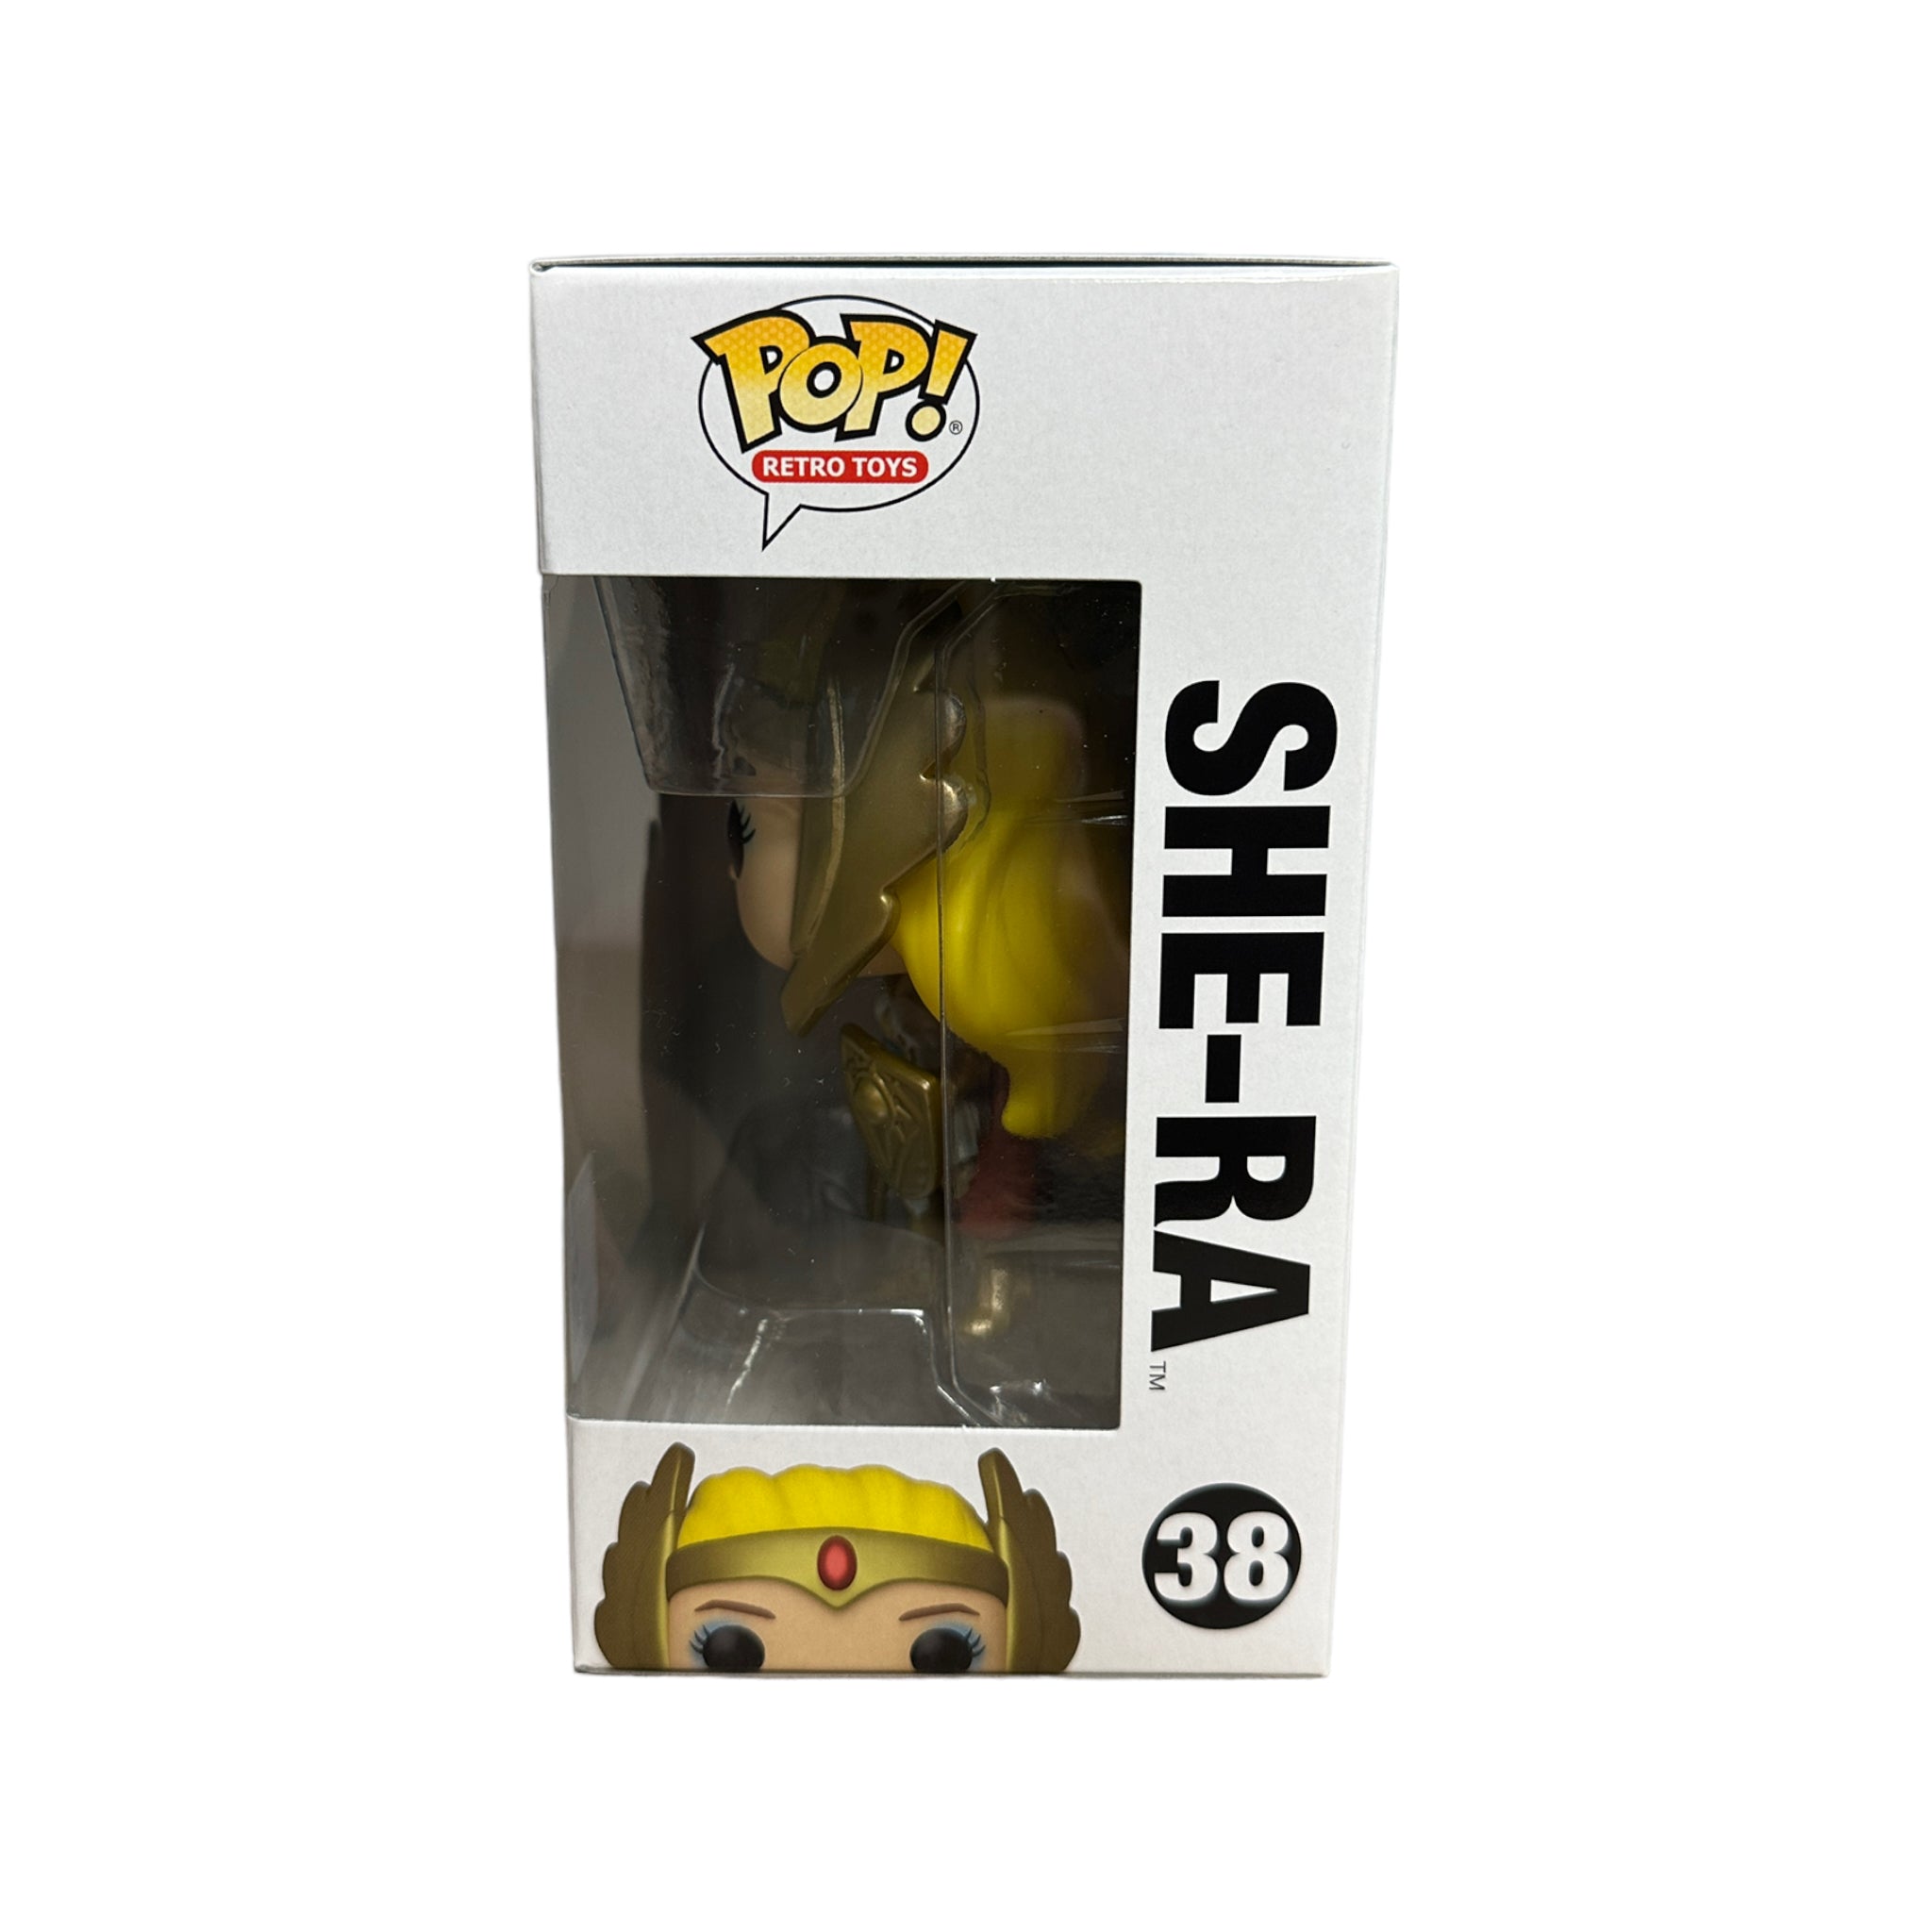 She-Ra #38 (Metallic) Funko Pop! - Masters of The Universe - Wonder Con 2022 Shared Exclusive - Condition 8.75/10